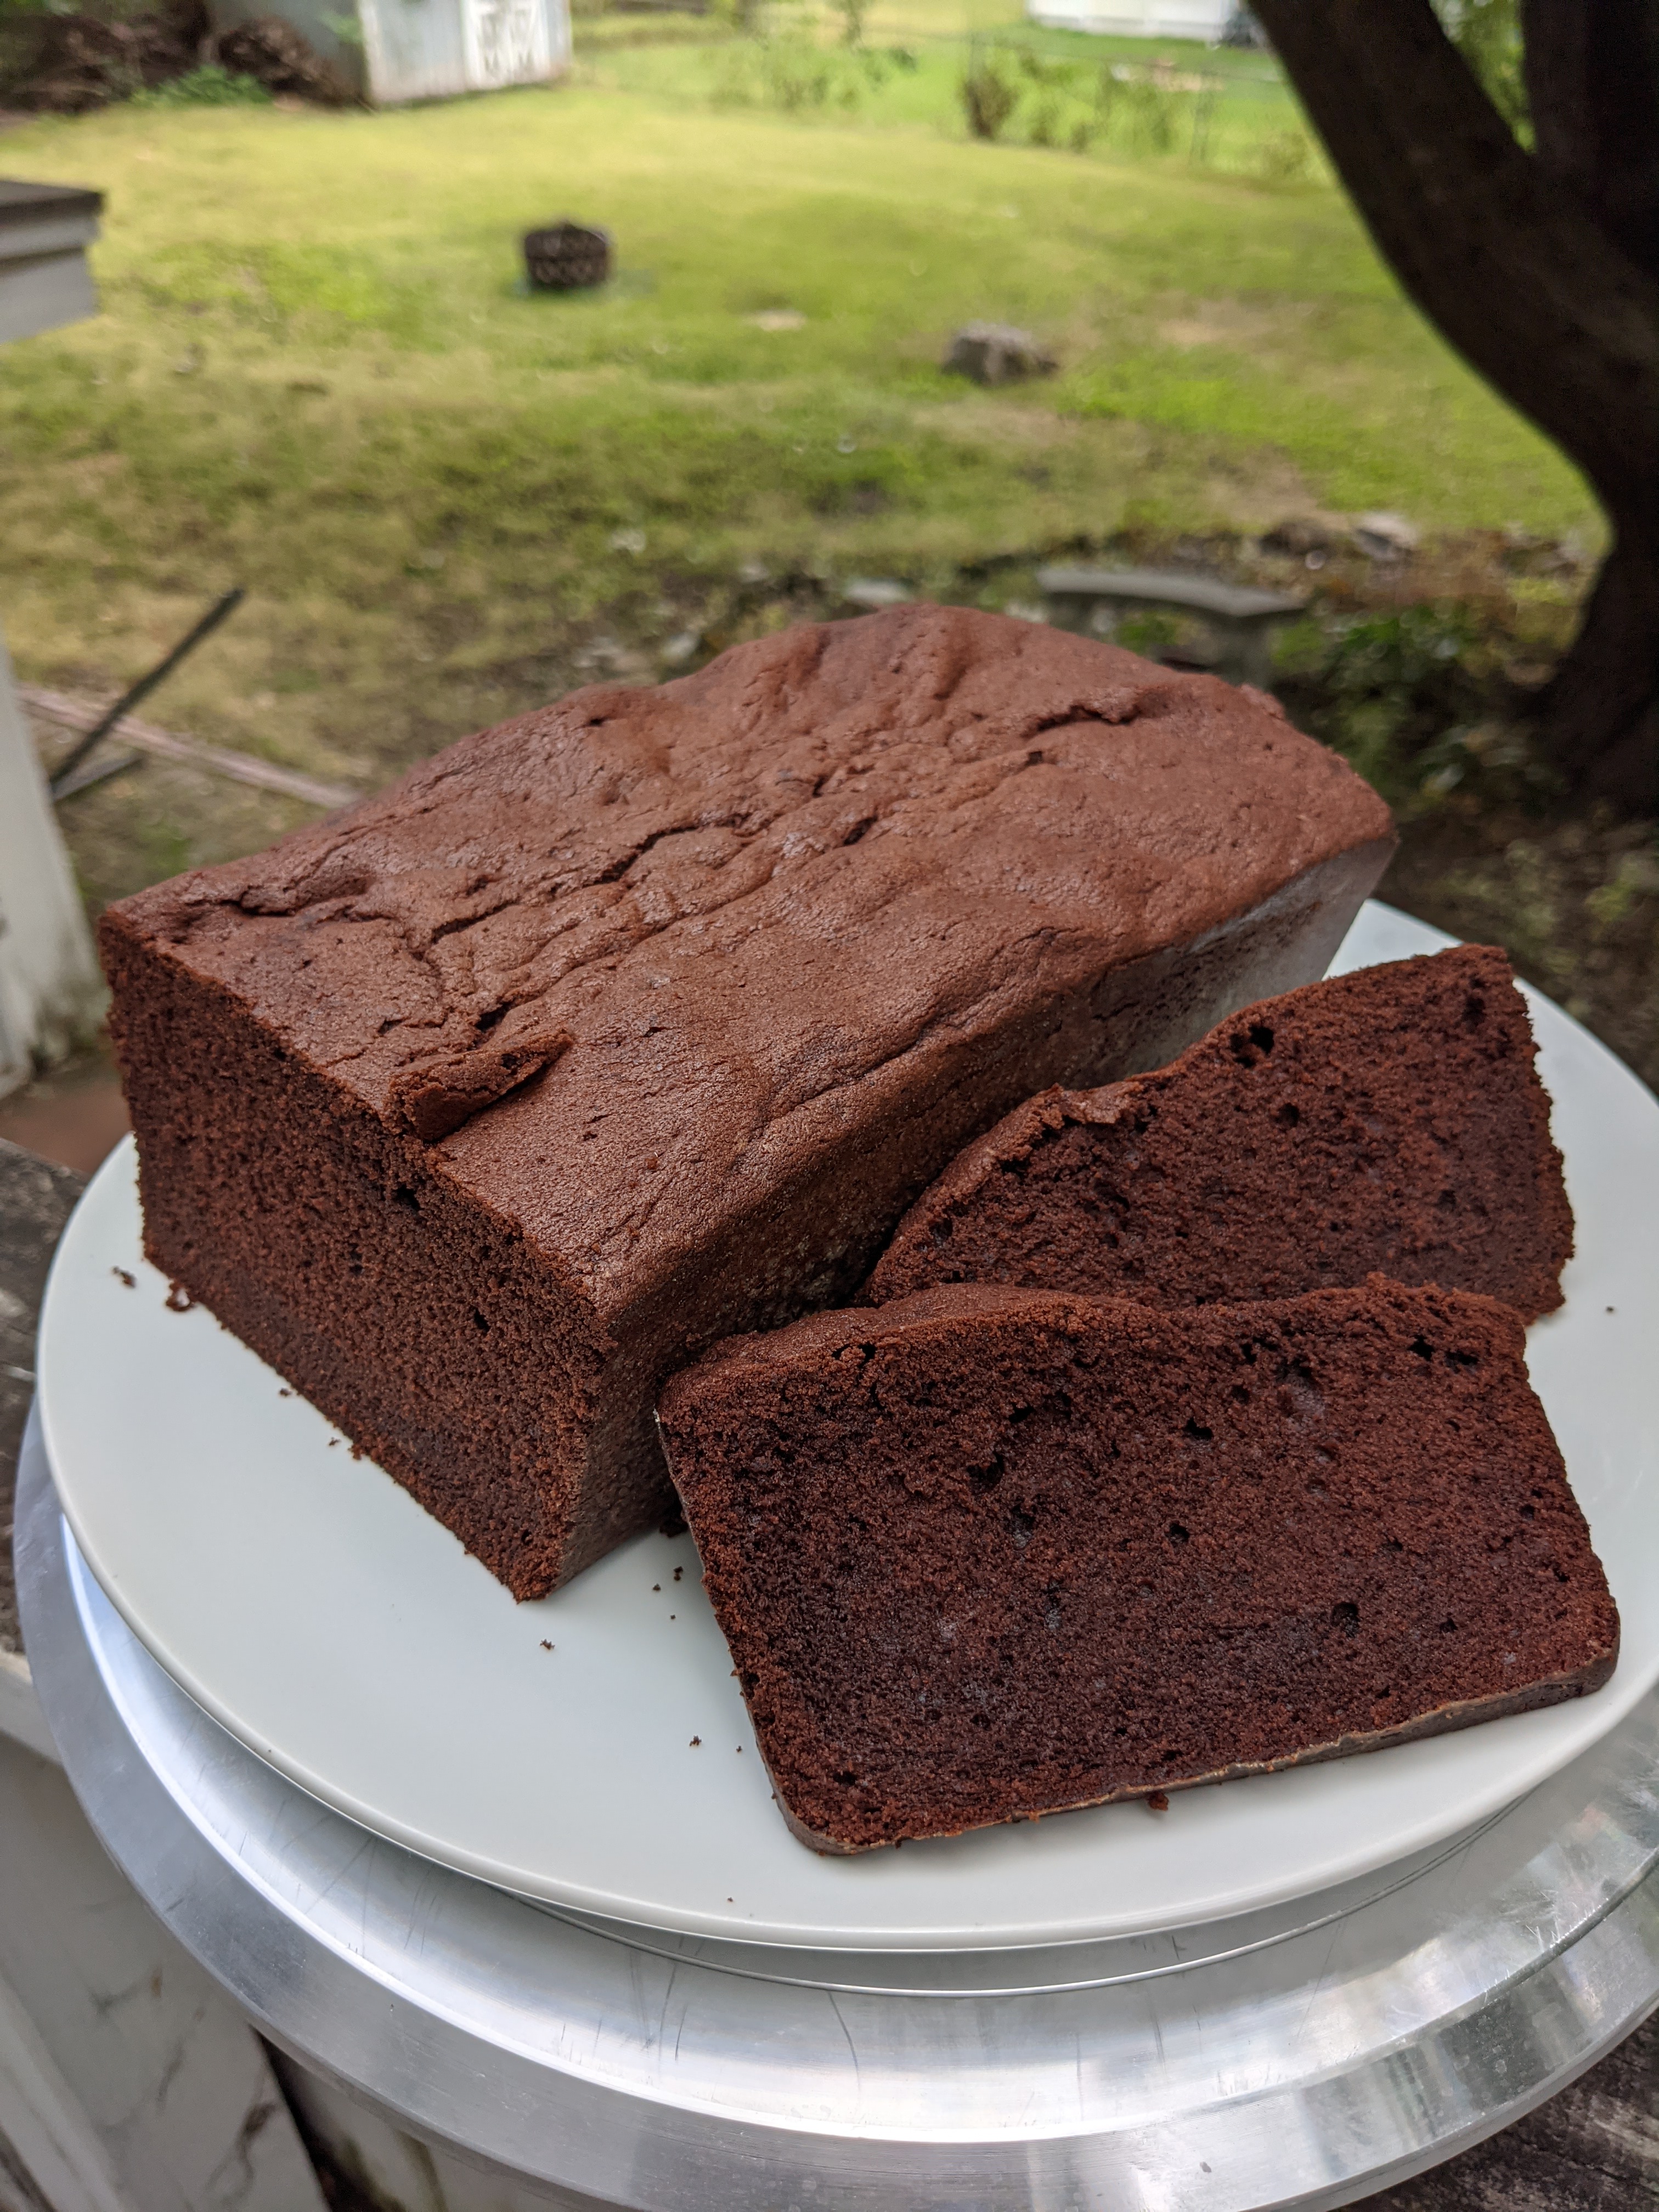 A loaf of chocolate pound cake with two slices